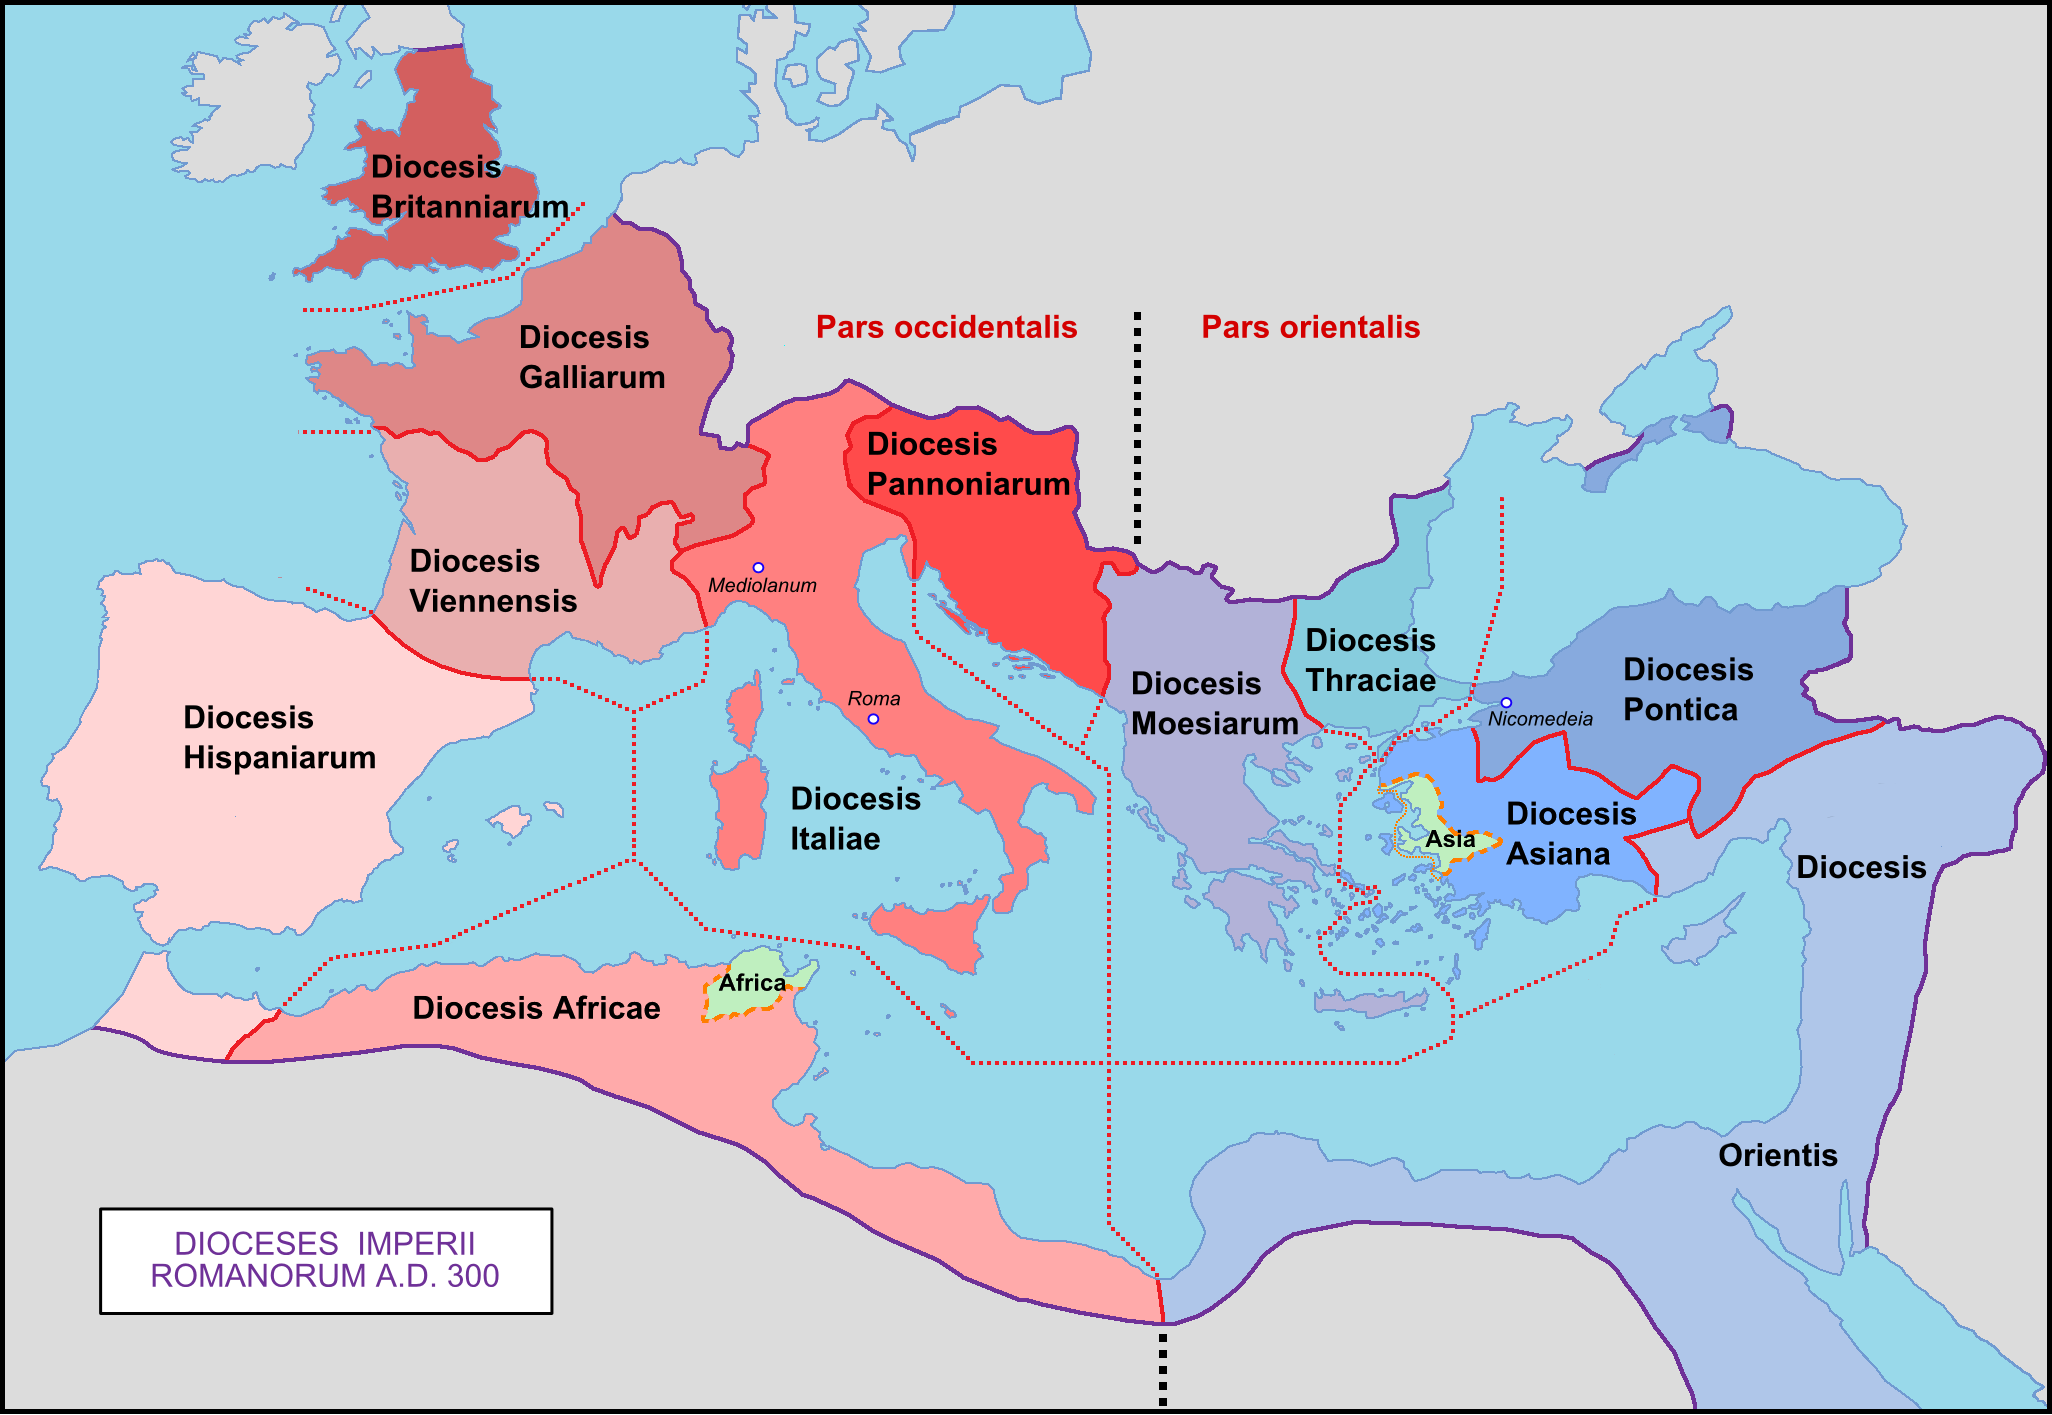 http://upload.wikimedia.org/wikipedia/commons/d/d4/Roman_Empire_with_dioceses_in_300_AD.png